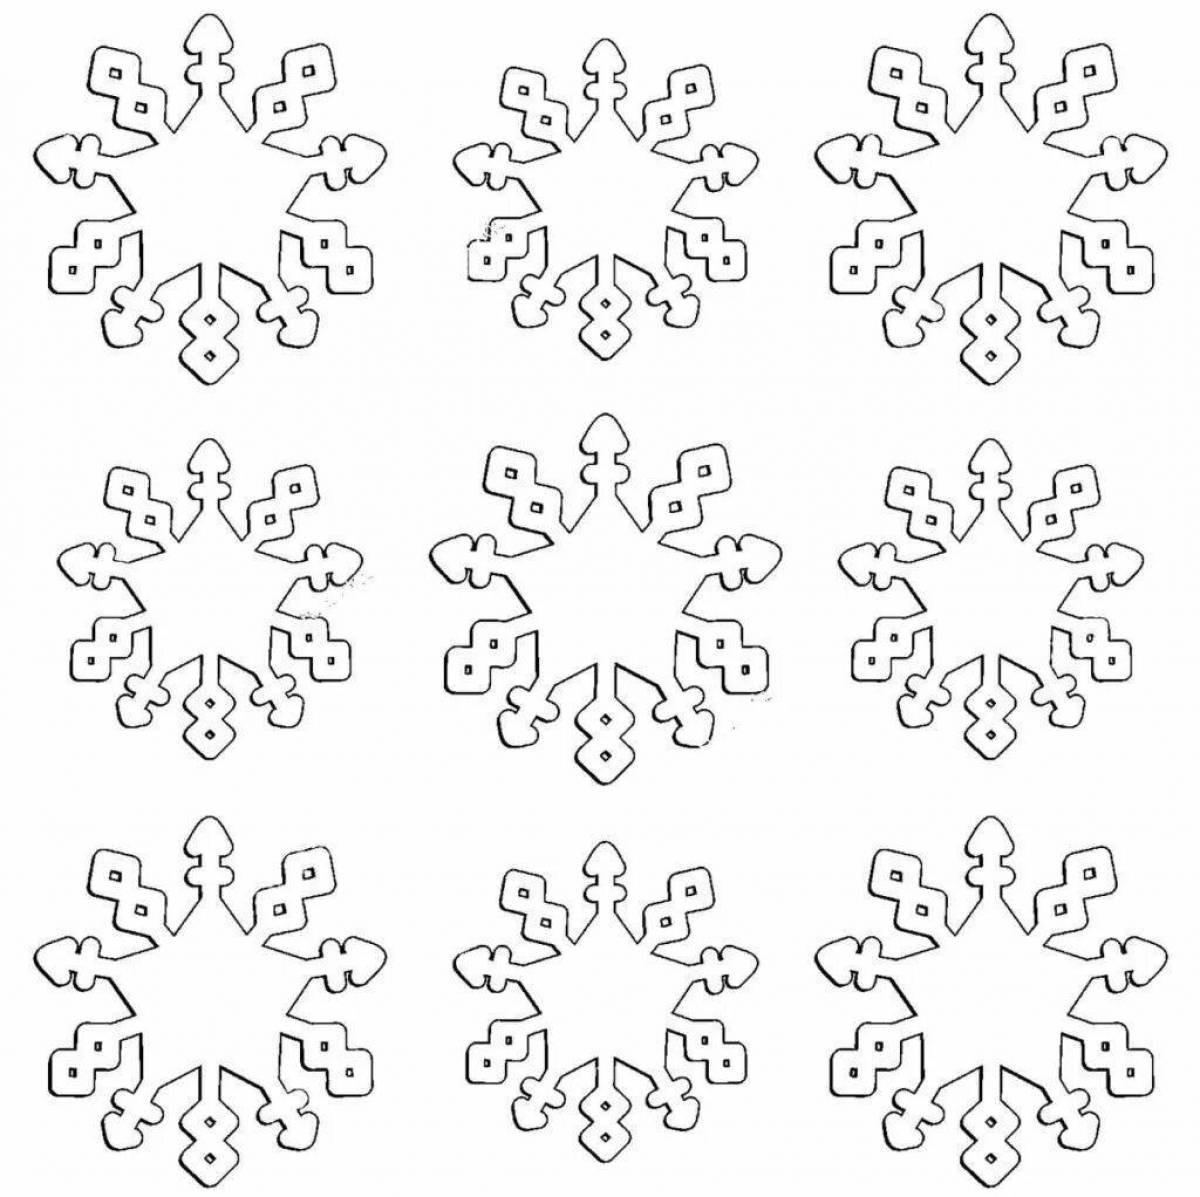 Fabulous coloring pages snowflakes for children 4-5 years old in kindergarten